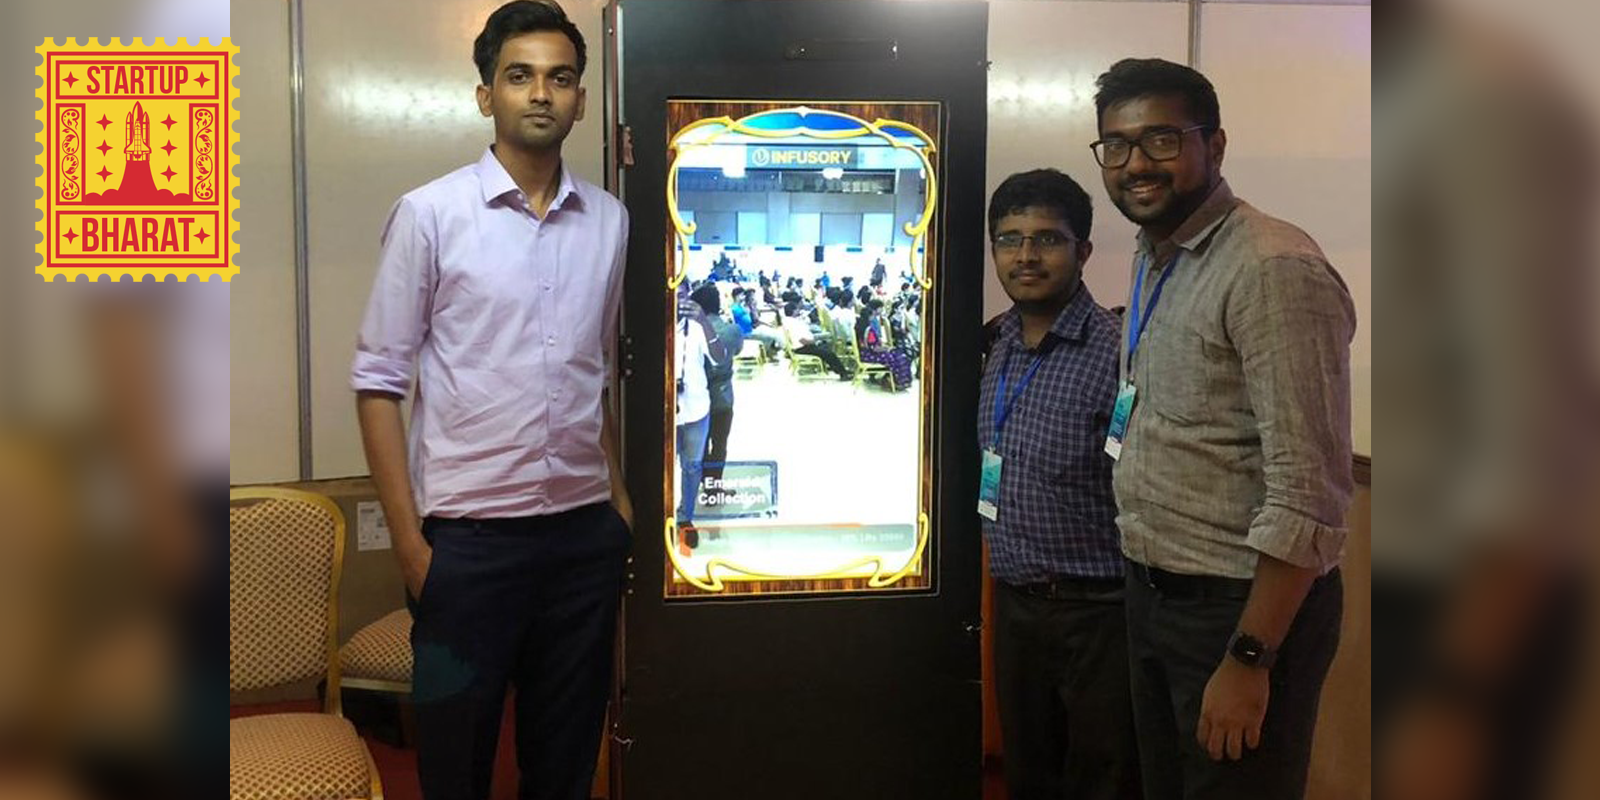 [Startup Bharat] Using AR, Thrissur-based Infusory is helping teachers break down complex ideas in a fun, engaging way 